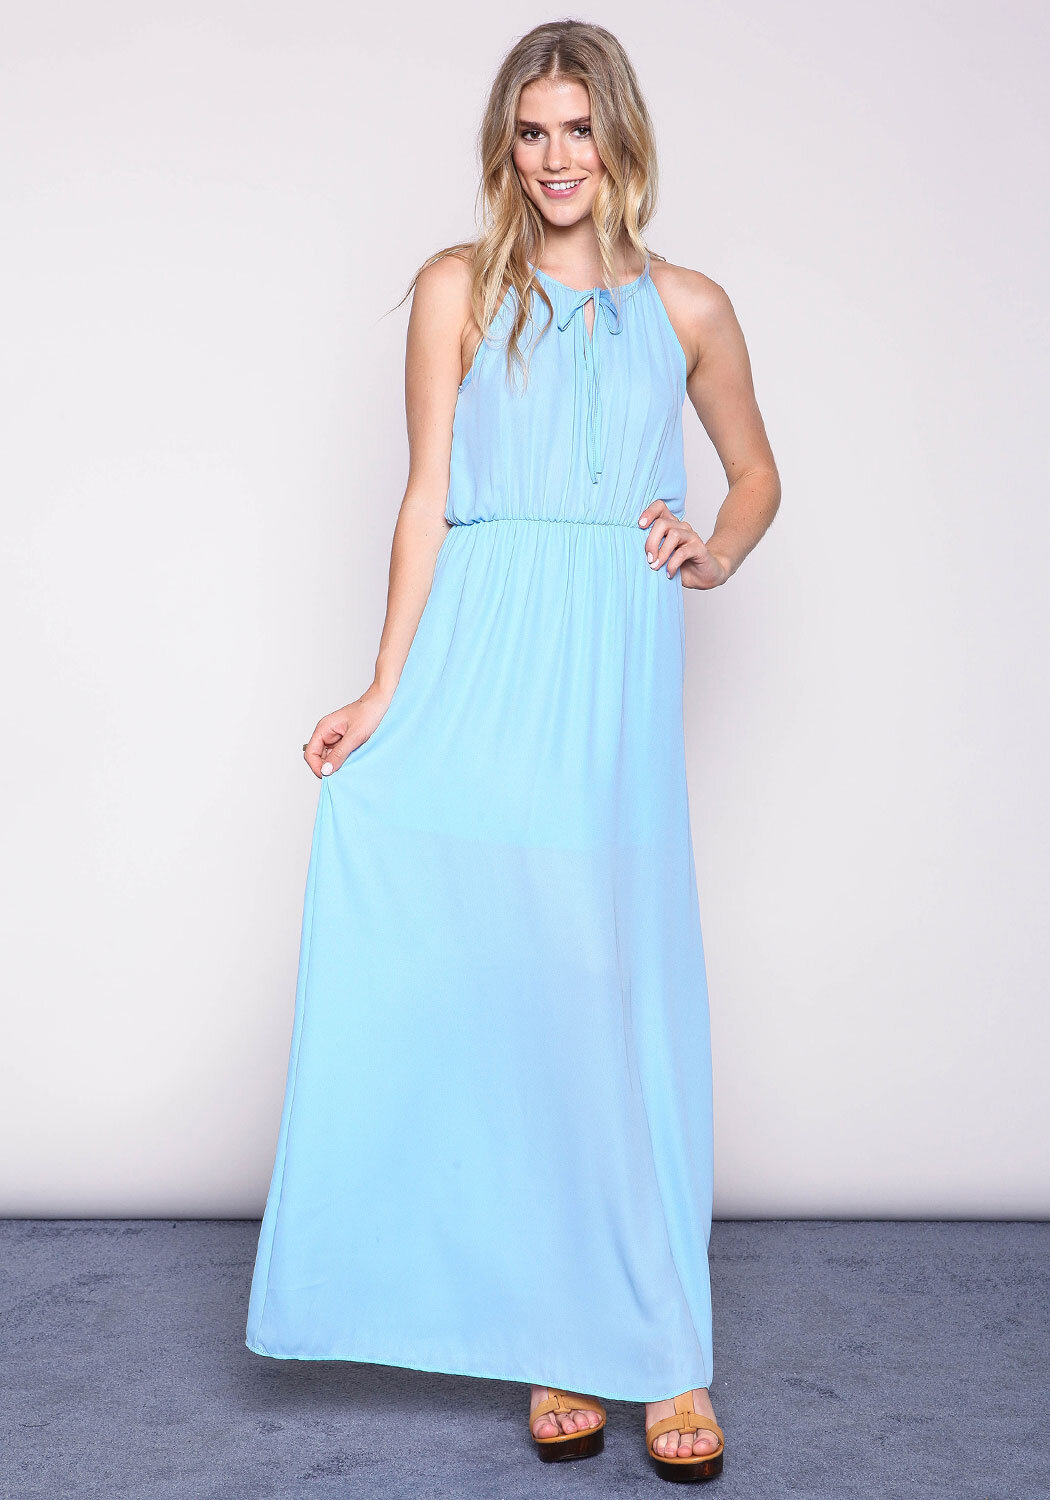 Junior Clothing | Blue Tied Woven Maxi Dress | Loveculture.com